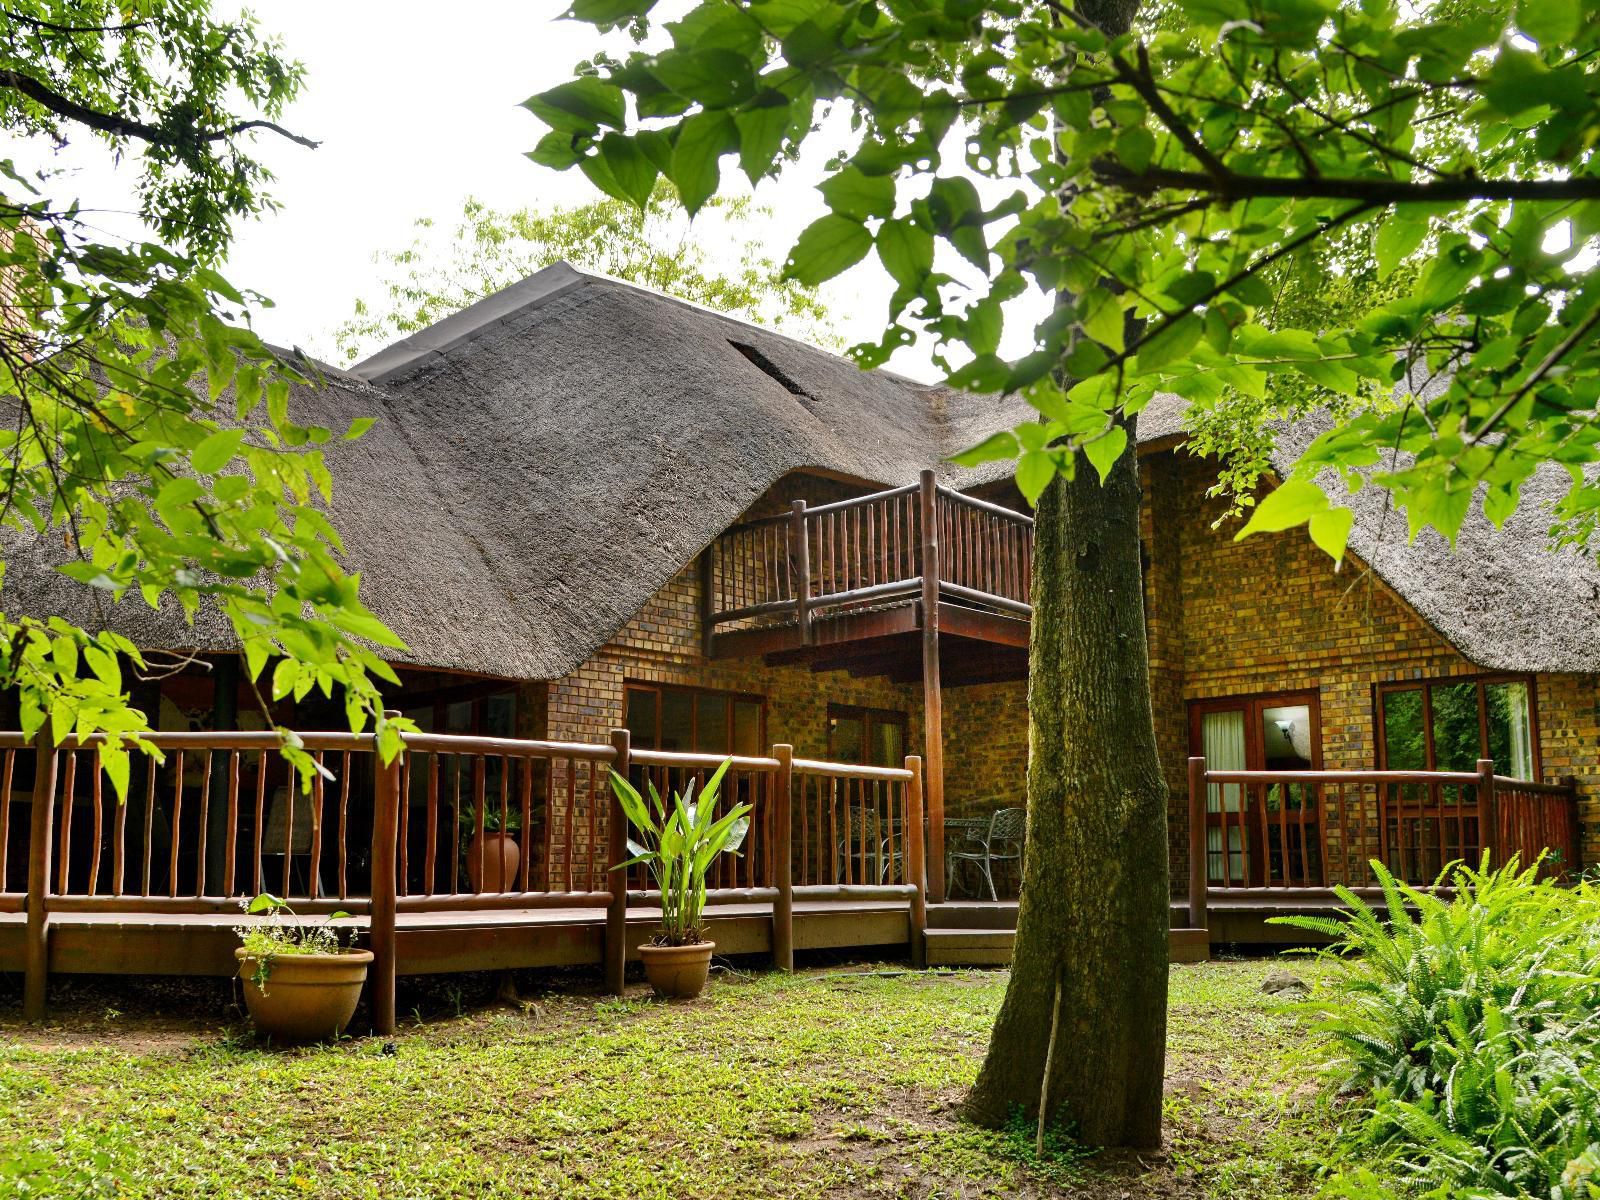 Cambalala Kruger Park Lodge Luxury Self Catering Unit Hazyview Mpumalanga South Africa Building, Architecture